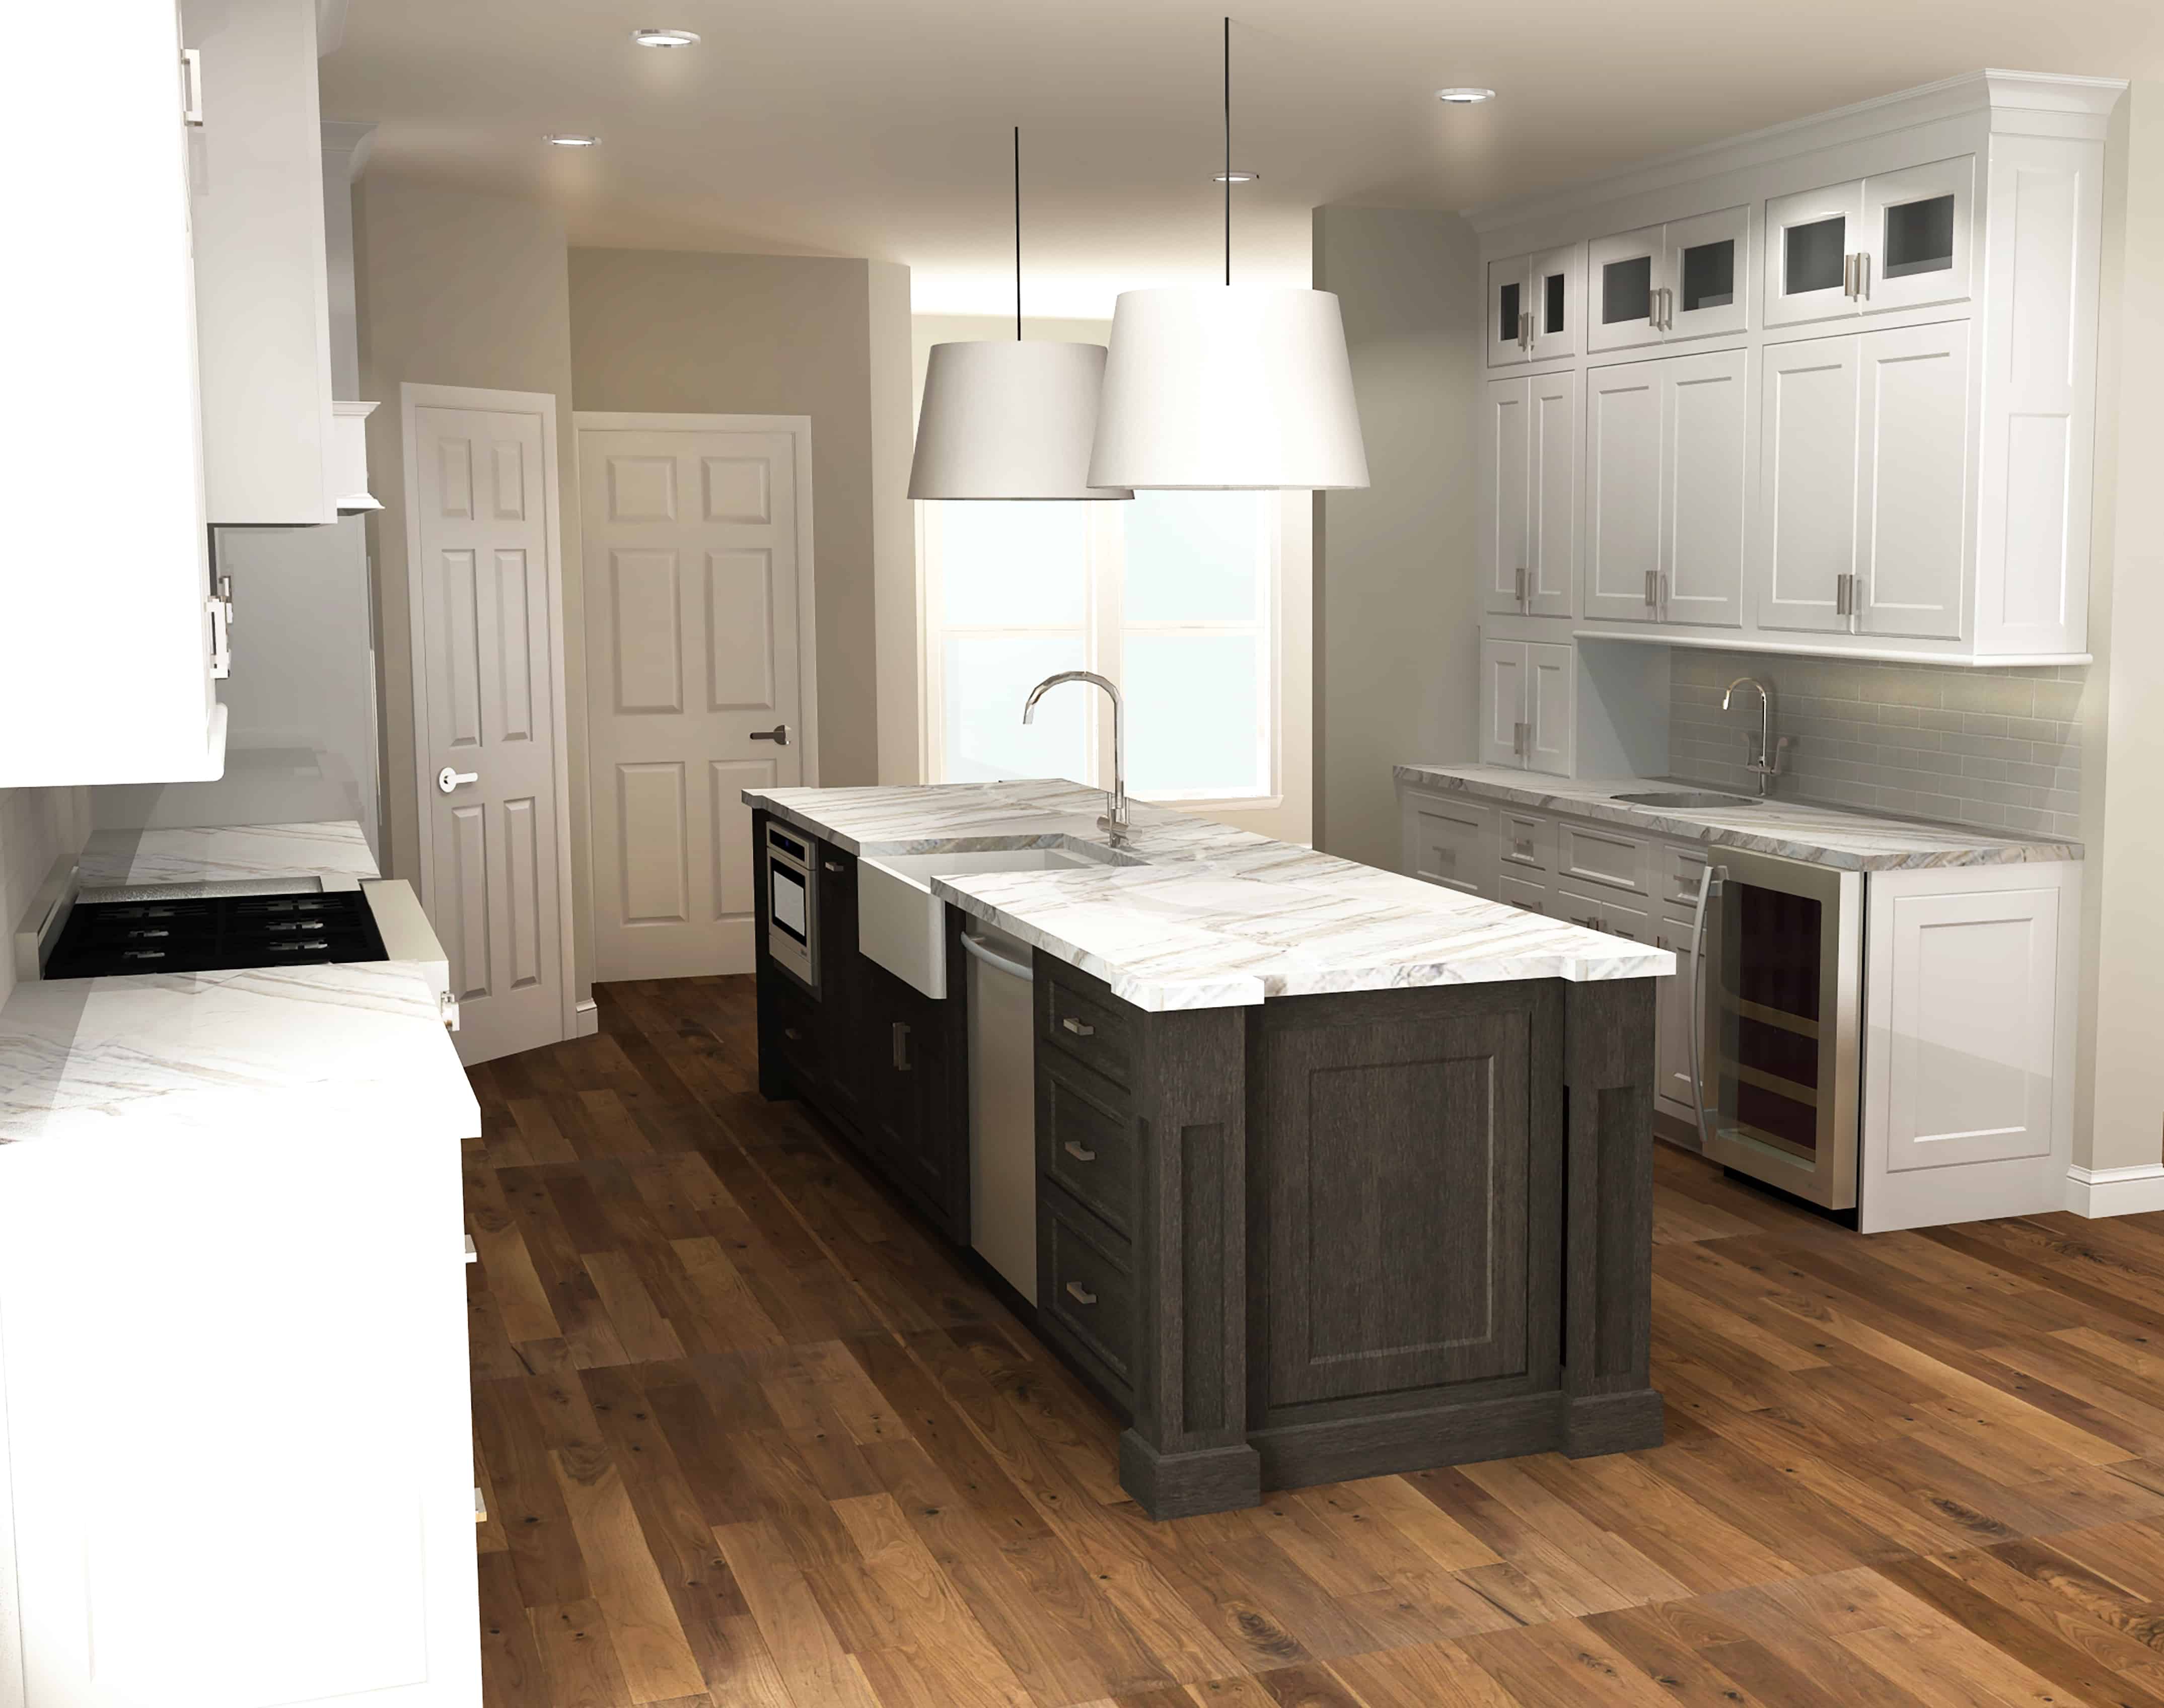 Kitchen design rendering for kitchen remodeling project in Northbrook, IL